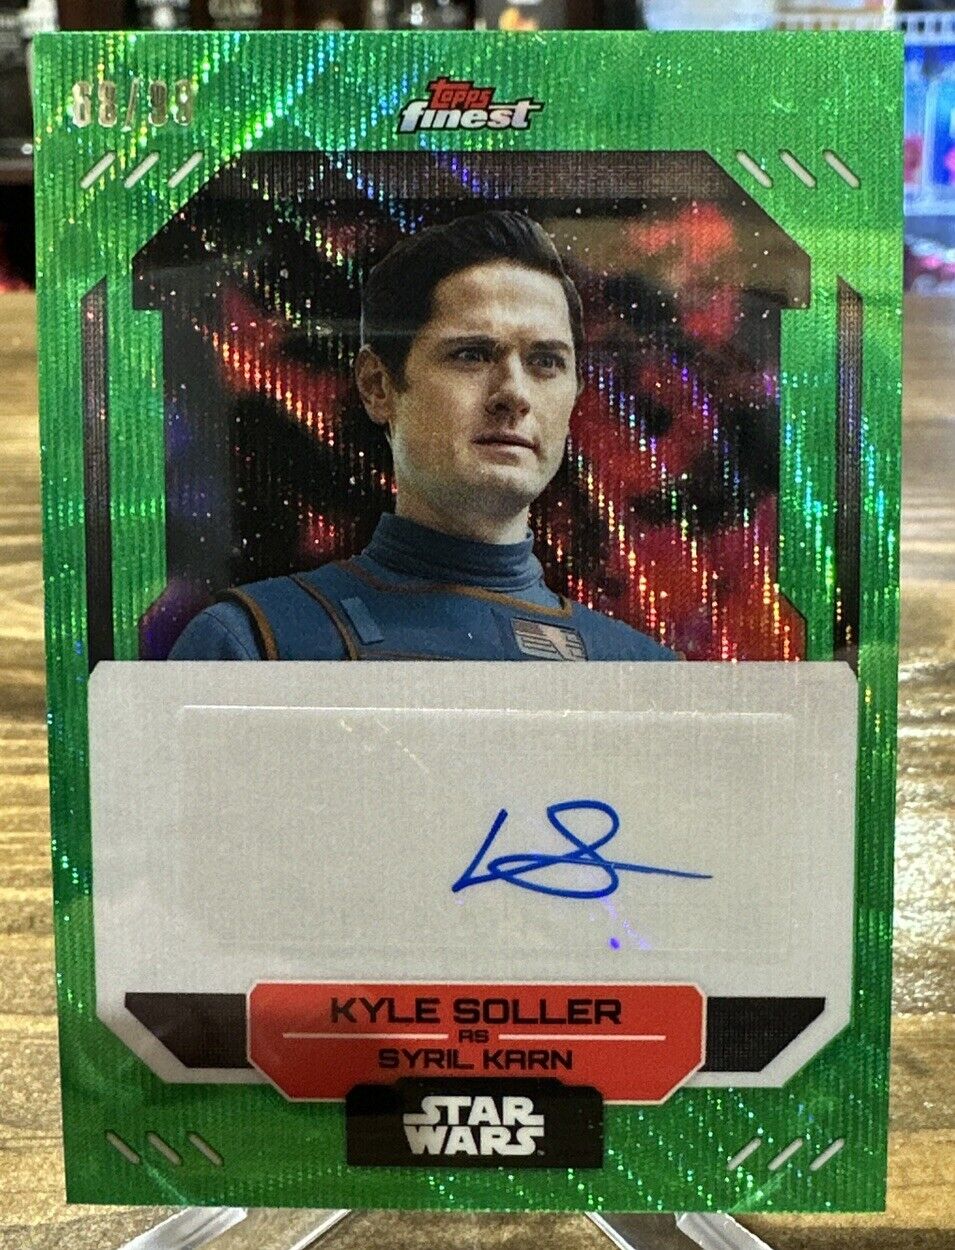 2023 Topps Star Wars Finest Kyle Soller as Syril Karn Green Wave Auto Card /99